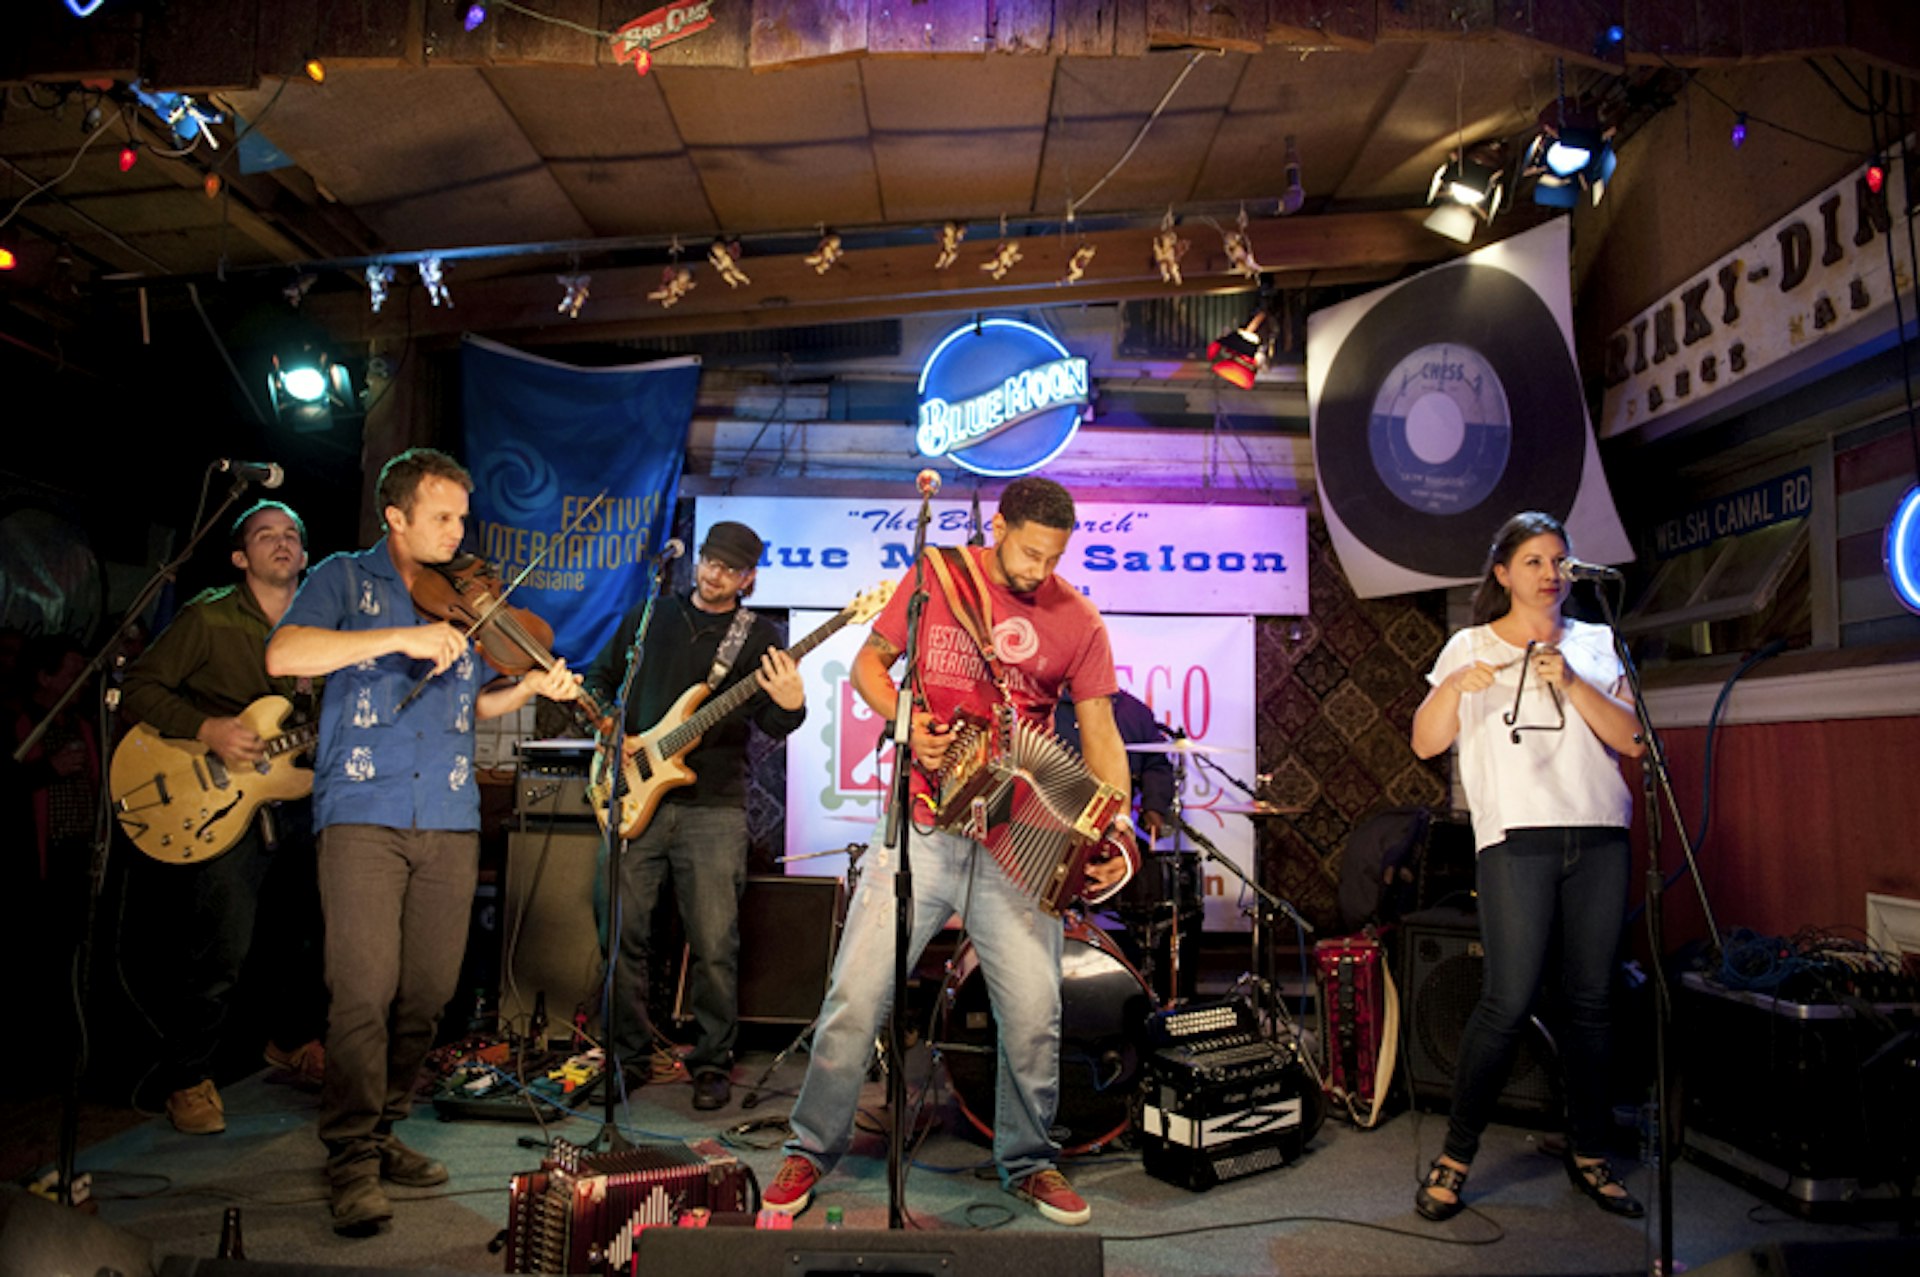 Cajun band performing at the Blue Moon Saloon. Image courtesy of Blue Moon Saloon & Guesthouse.